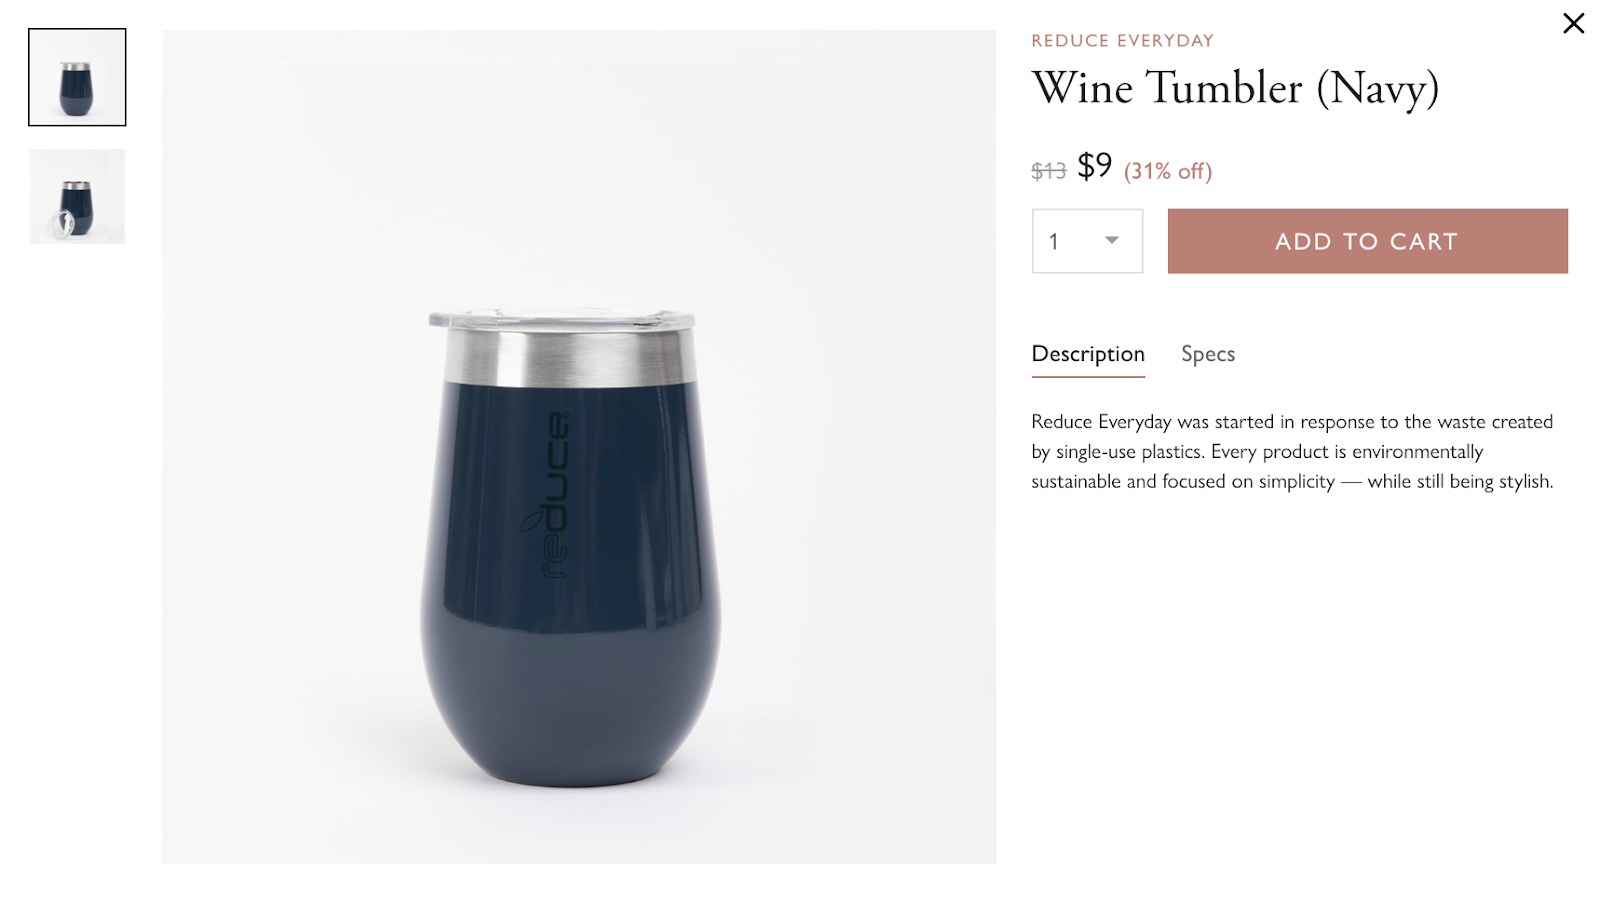 Find the wine tumbler in the causebox market